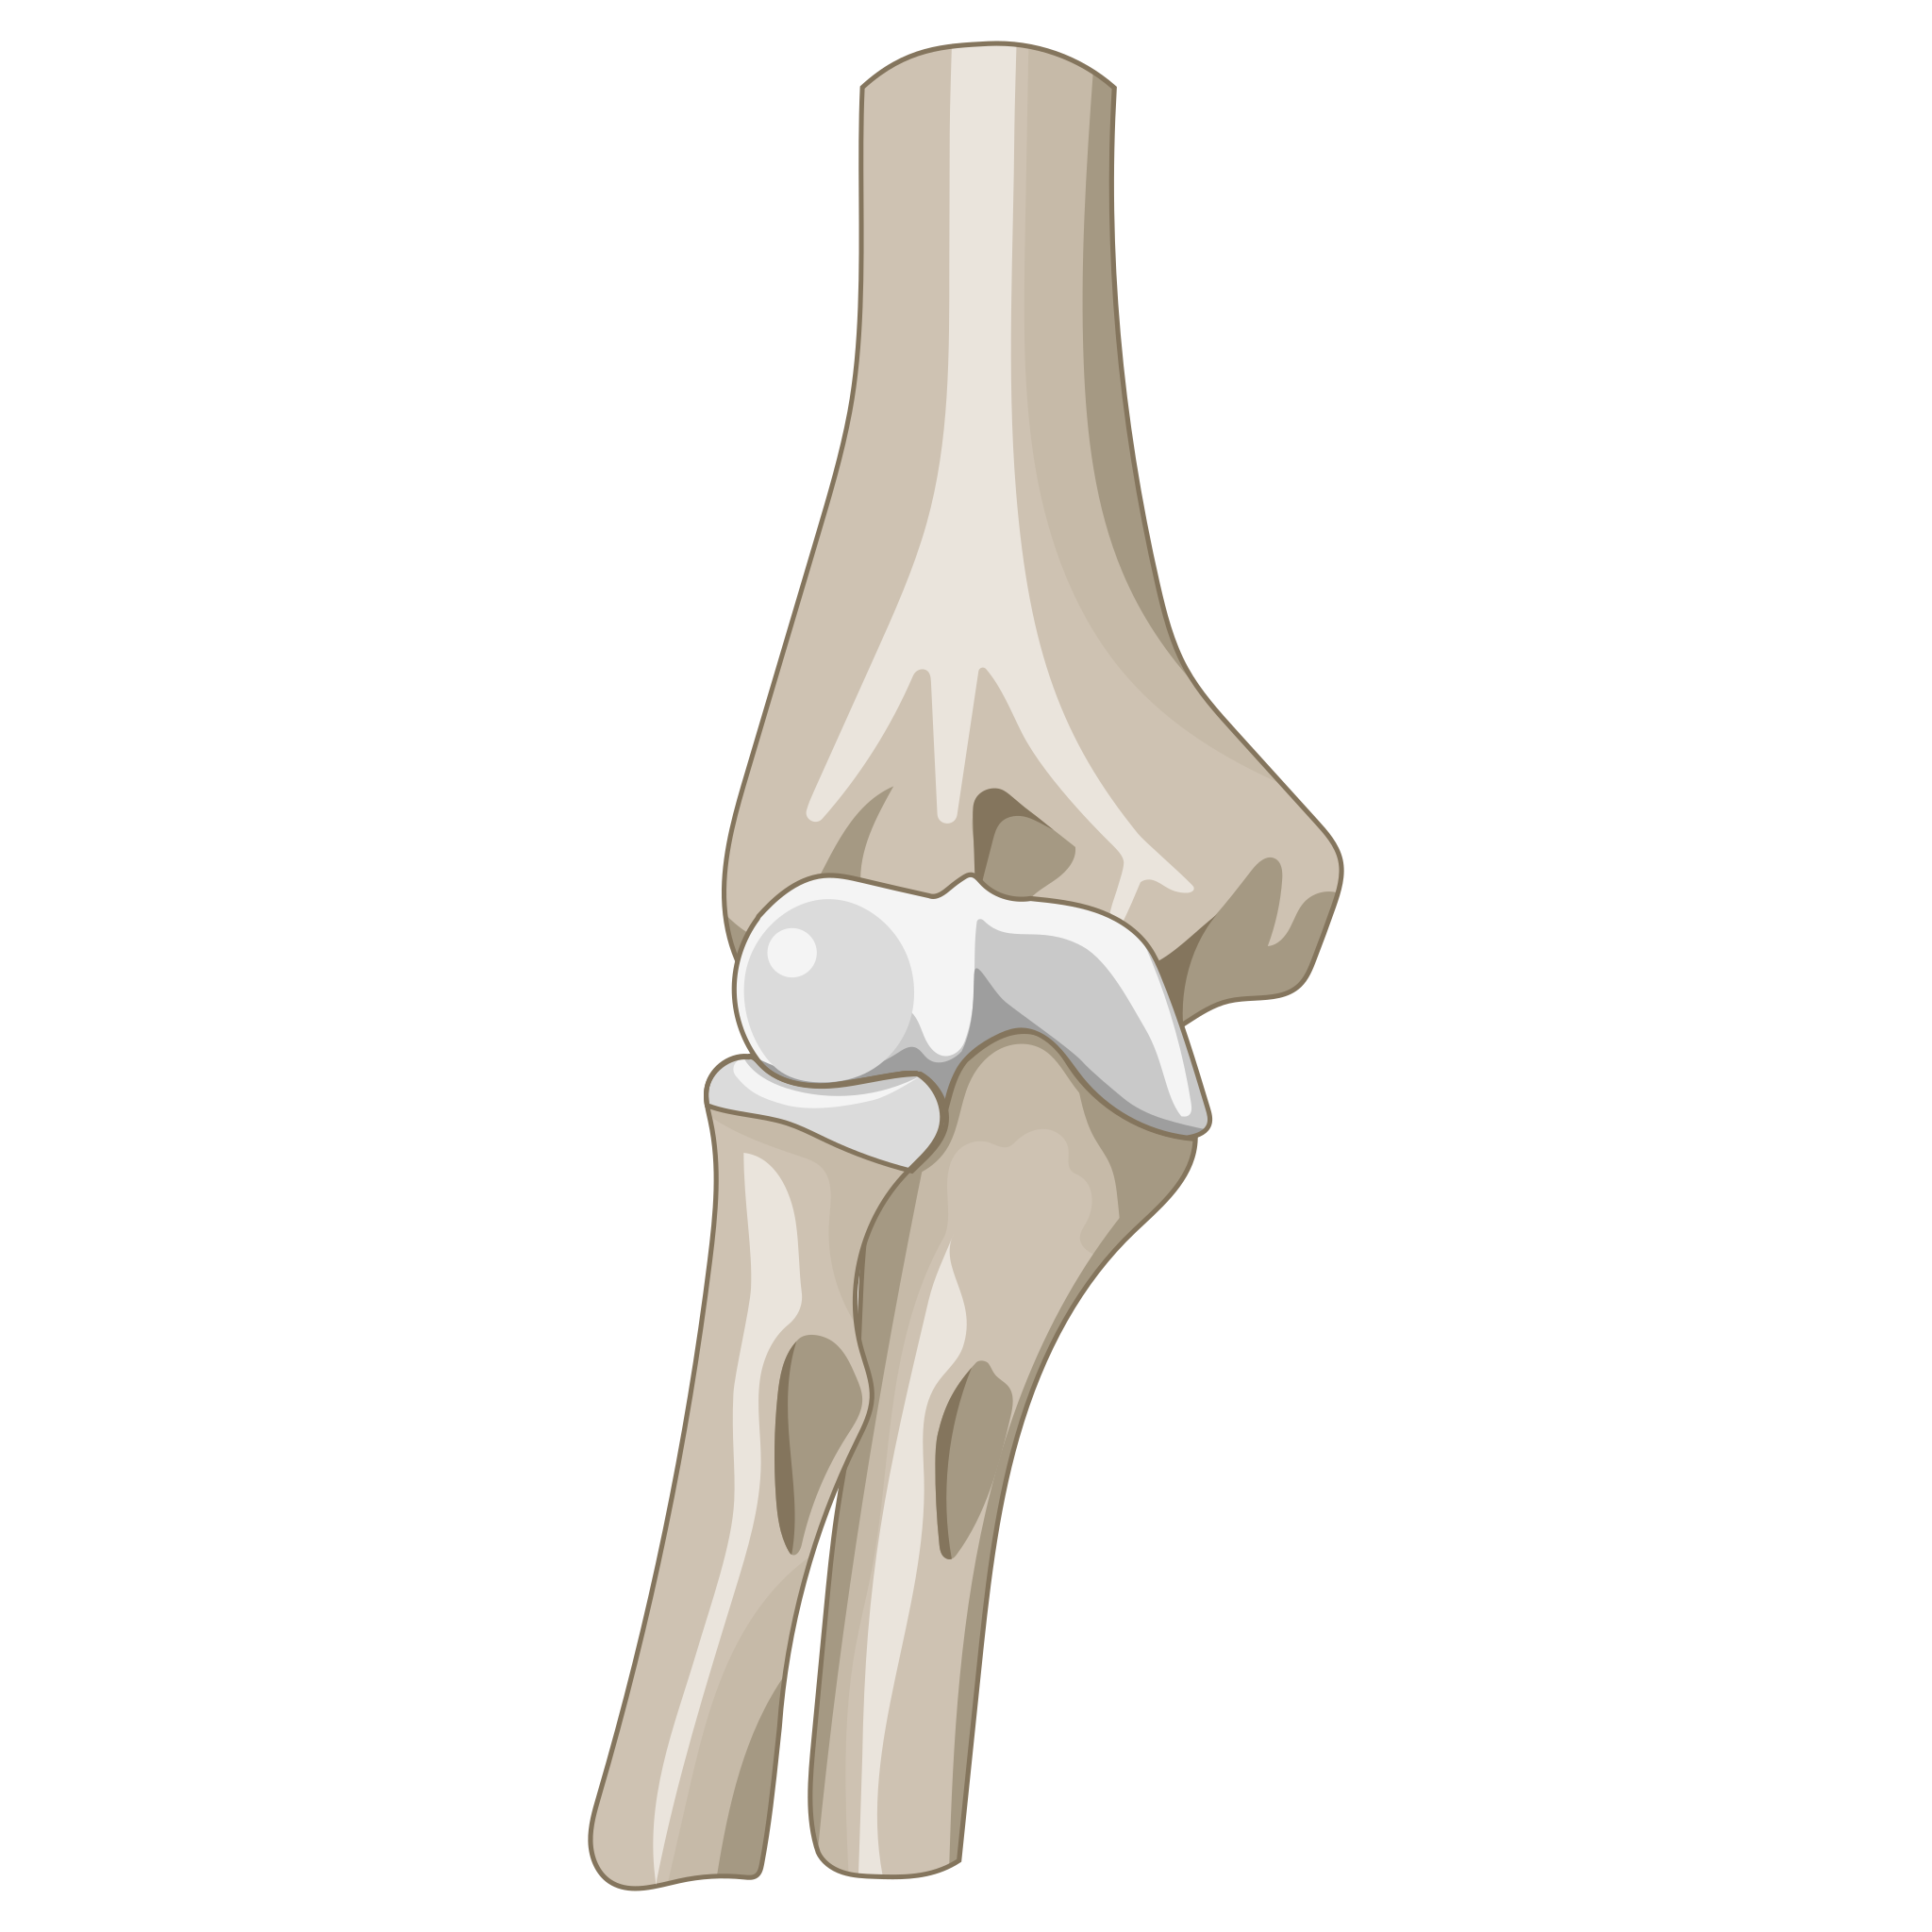 https://upload.wikimedia.org/wikipedia/commons/thumb/7/76/202107_Anterior_view_of_the_elbow_joint.svg/2048px-202107_Anterior_view_of_the_elbow_joint.svg.png